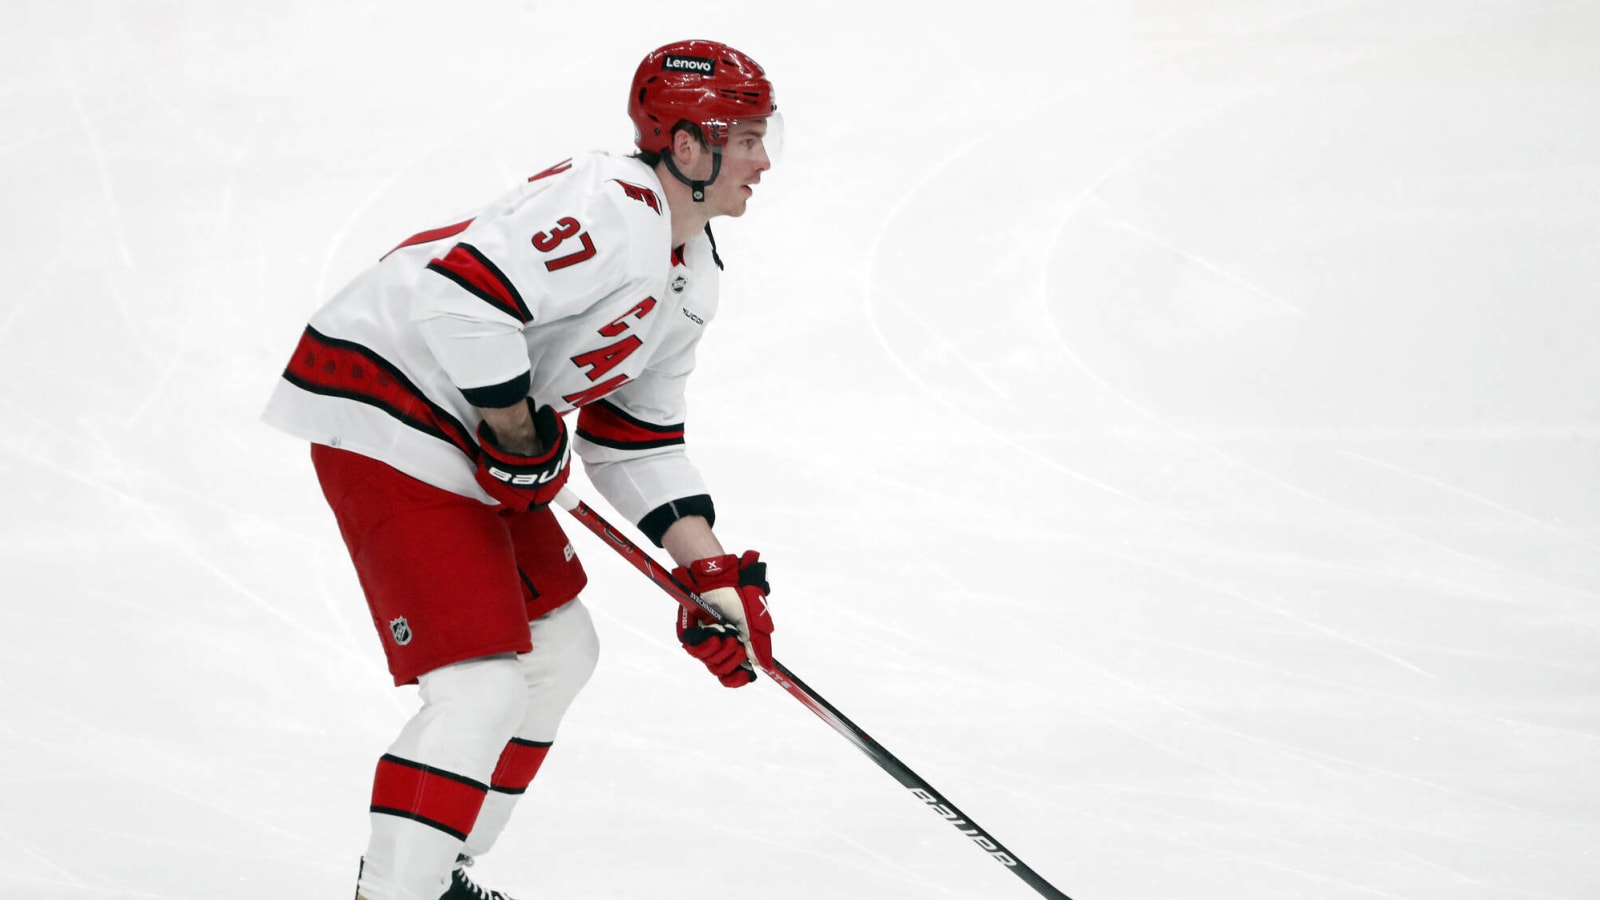 Understanding Andrei Svechnikov’s Recovery from ACL Surgery – Interview with a Collegiate Athlete and Advocate